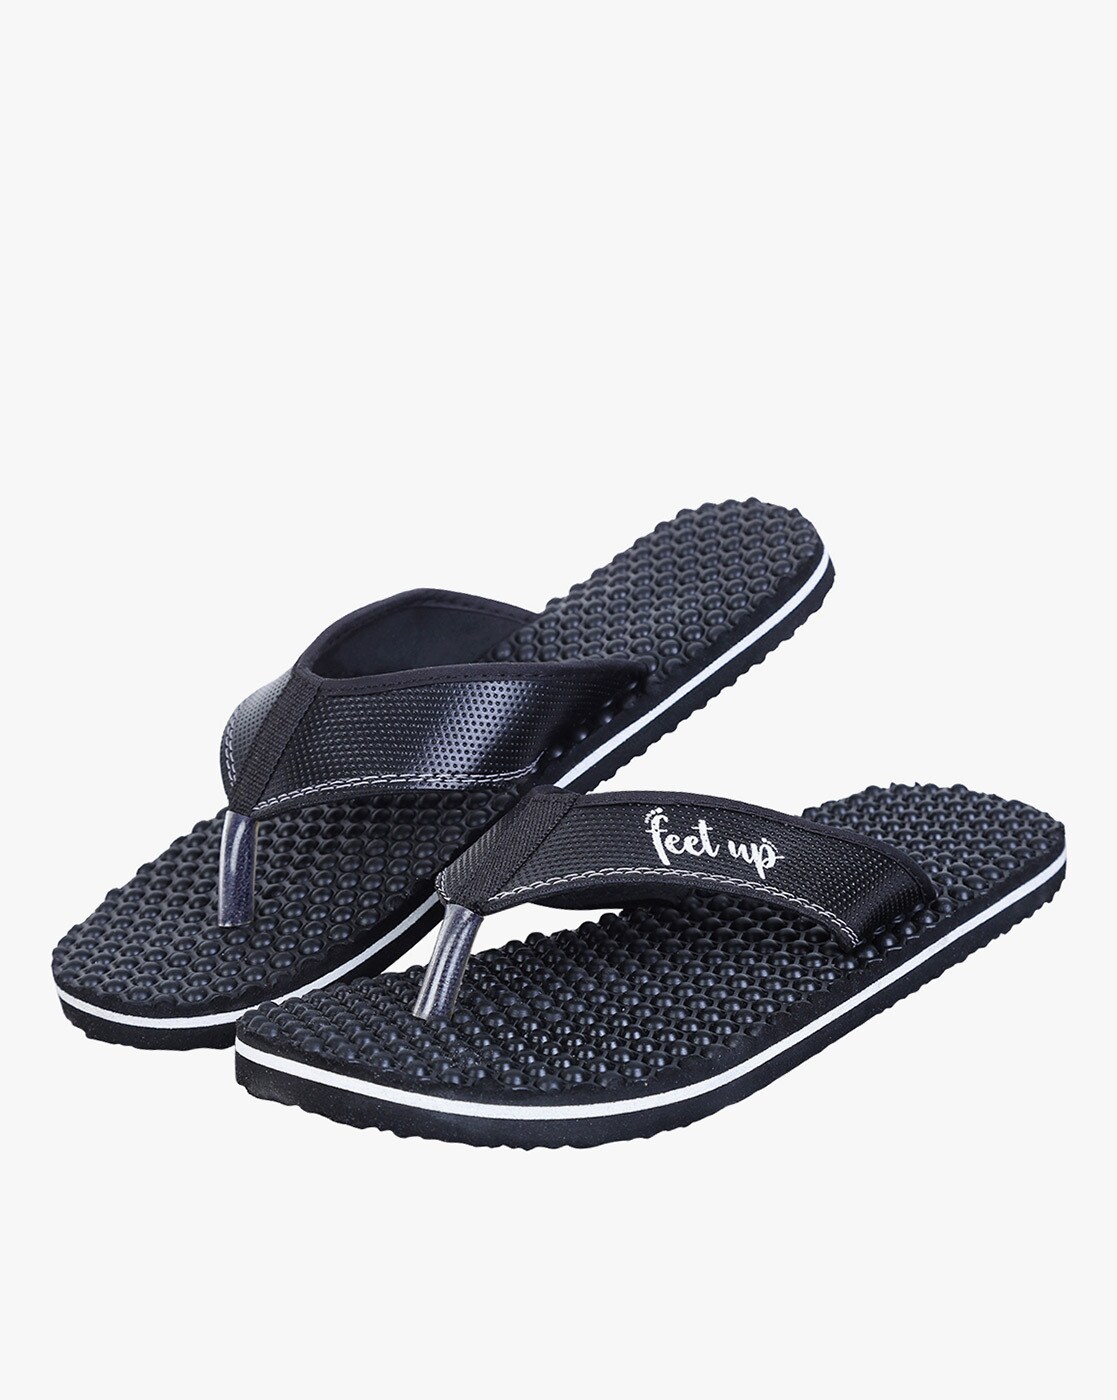 Flip Flop \u0026 Slippers for Men by FEET UP 